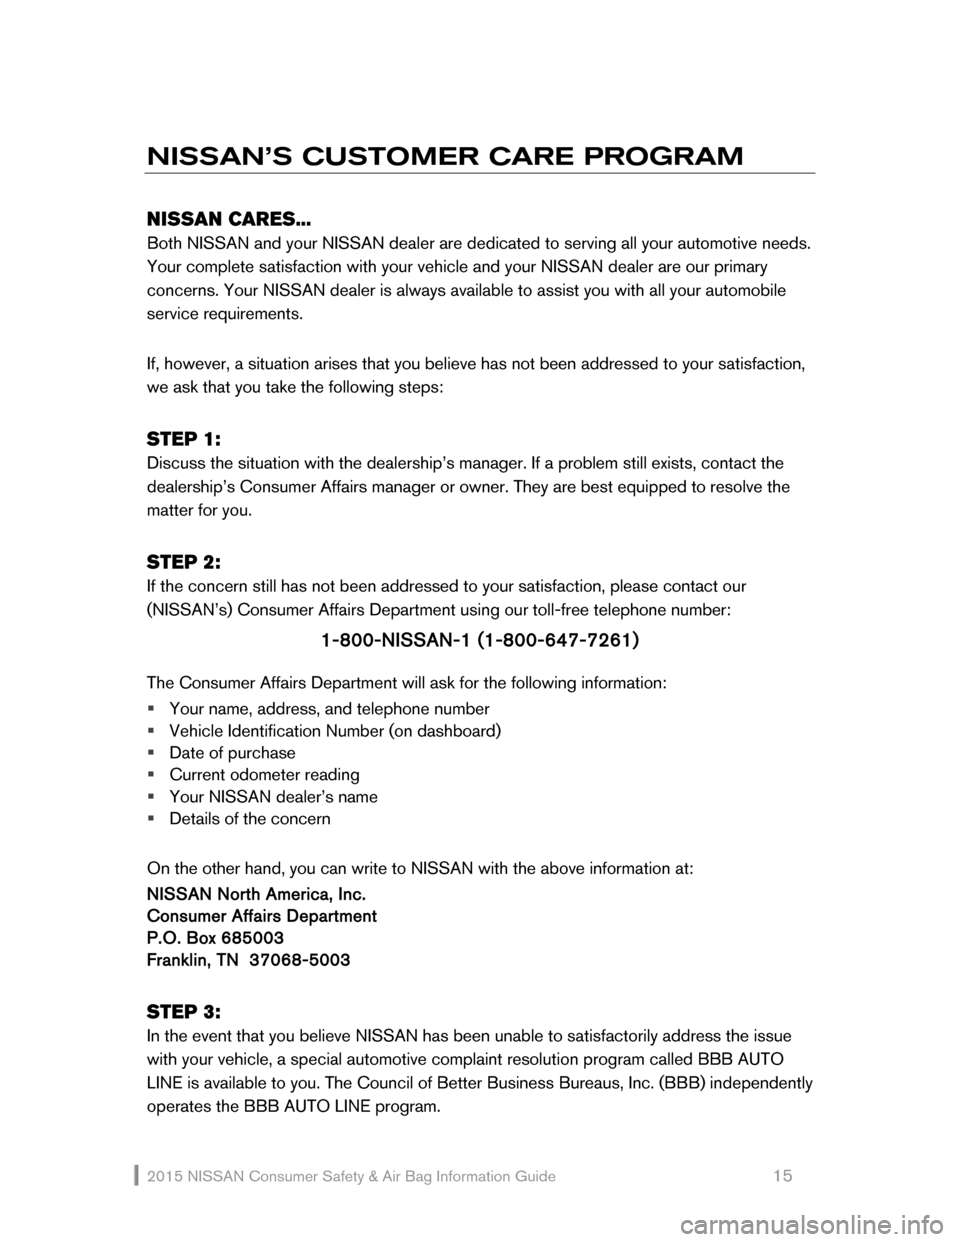 NISSAN ALTIMA 2015 L33 / 5.G Consumer Safety Air Bag Information Guide 2015 NI\f\fAN  Consumer \fafety  & Air Bag Information Guide                                                     15 
NISSAN ’S C\fSTOMER CARE PROGRAM  
 
NISSAN \fARES... 
Both NI\f\fAN  and your  N